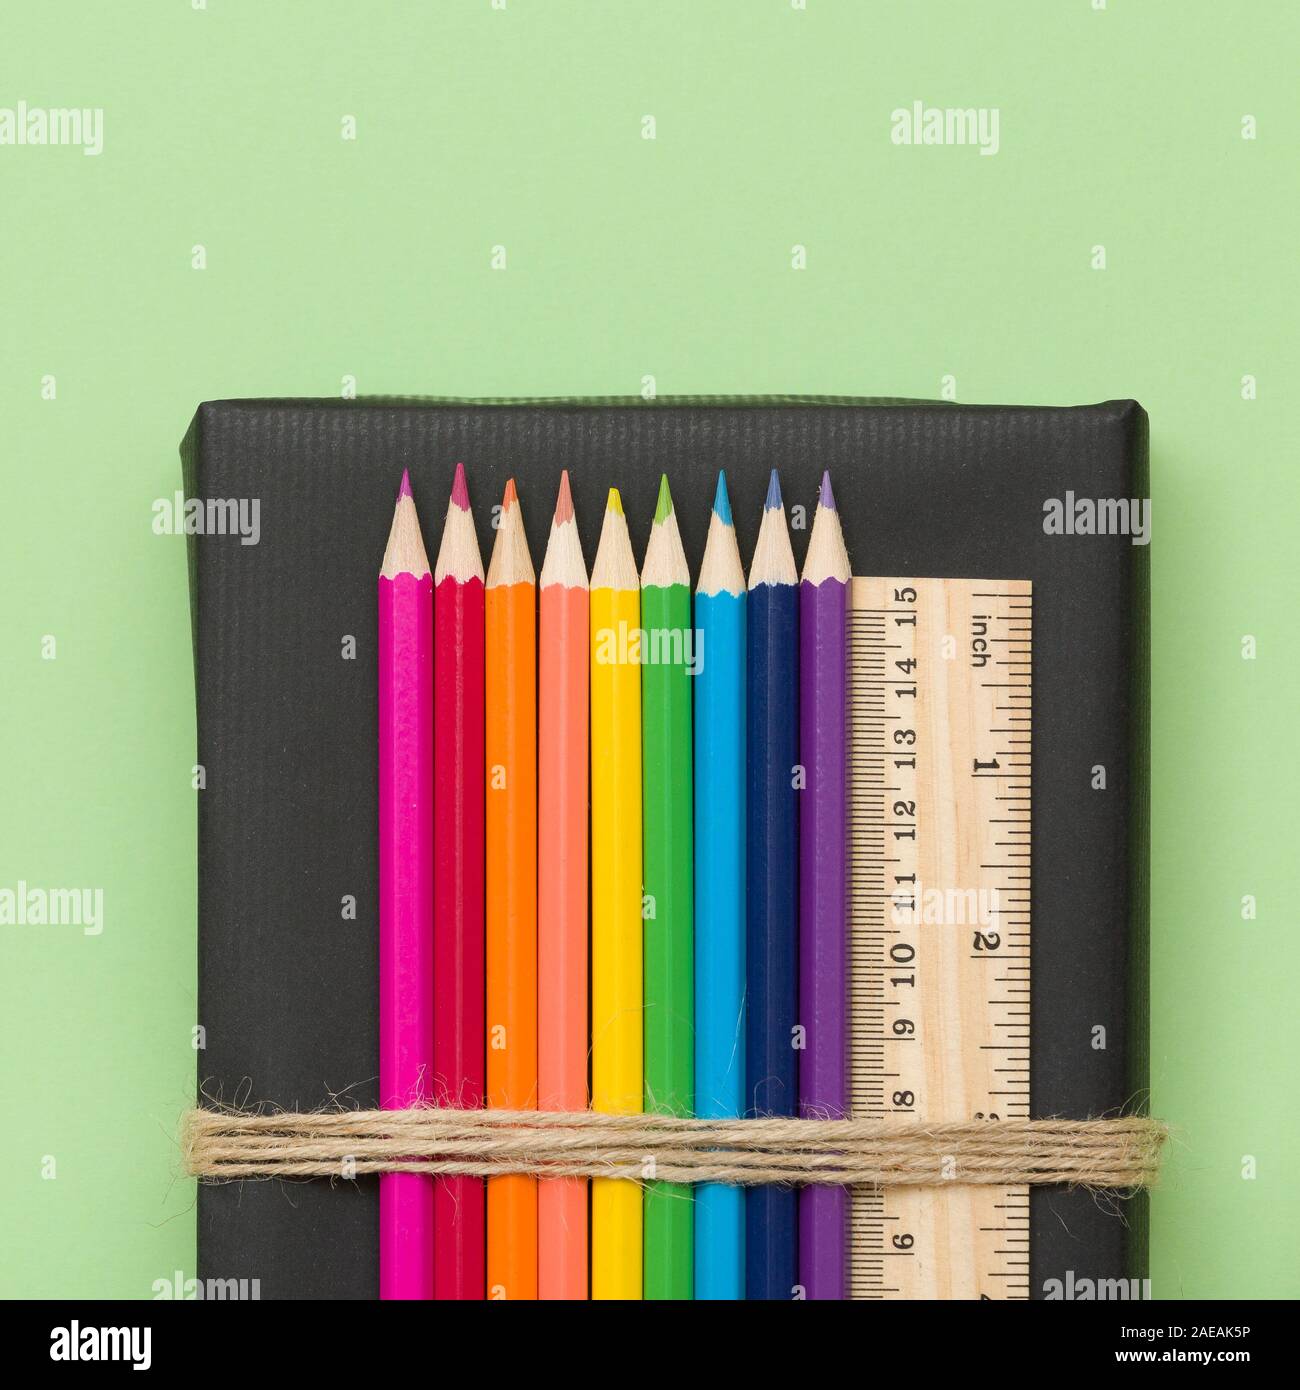 https://c8.alamy.com/comp/2AEAK5P/colorful-school-and-office-supplies-pencils-and-ruler-on-black-book-and-light-green-background-top-view-with-copy-space-2AEAK5P.jpg